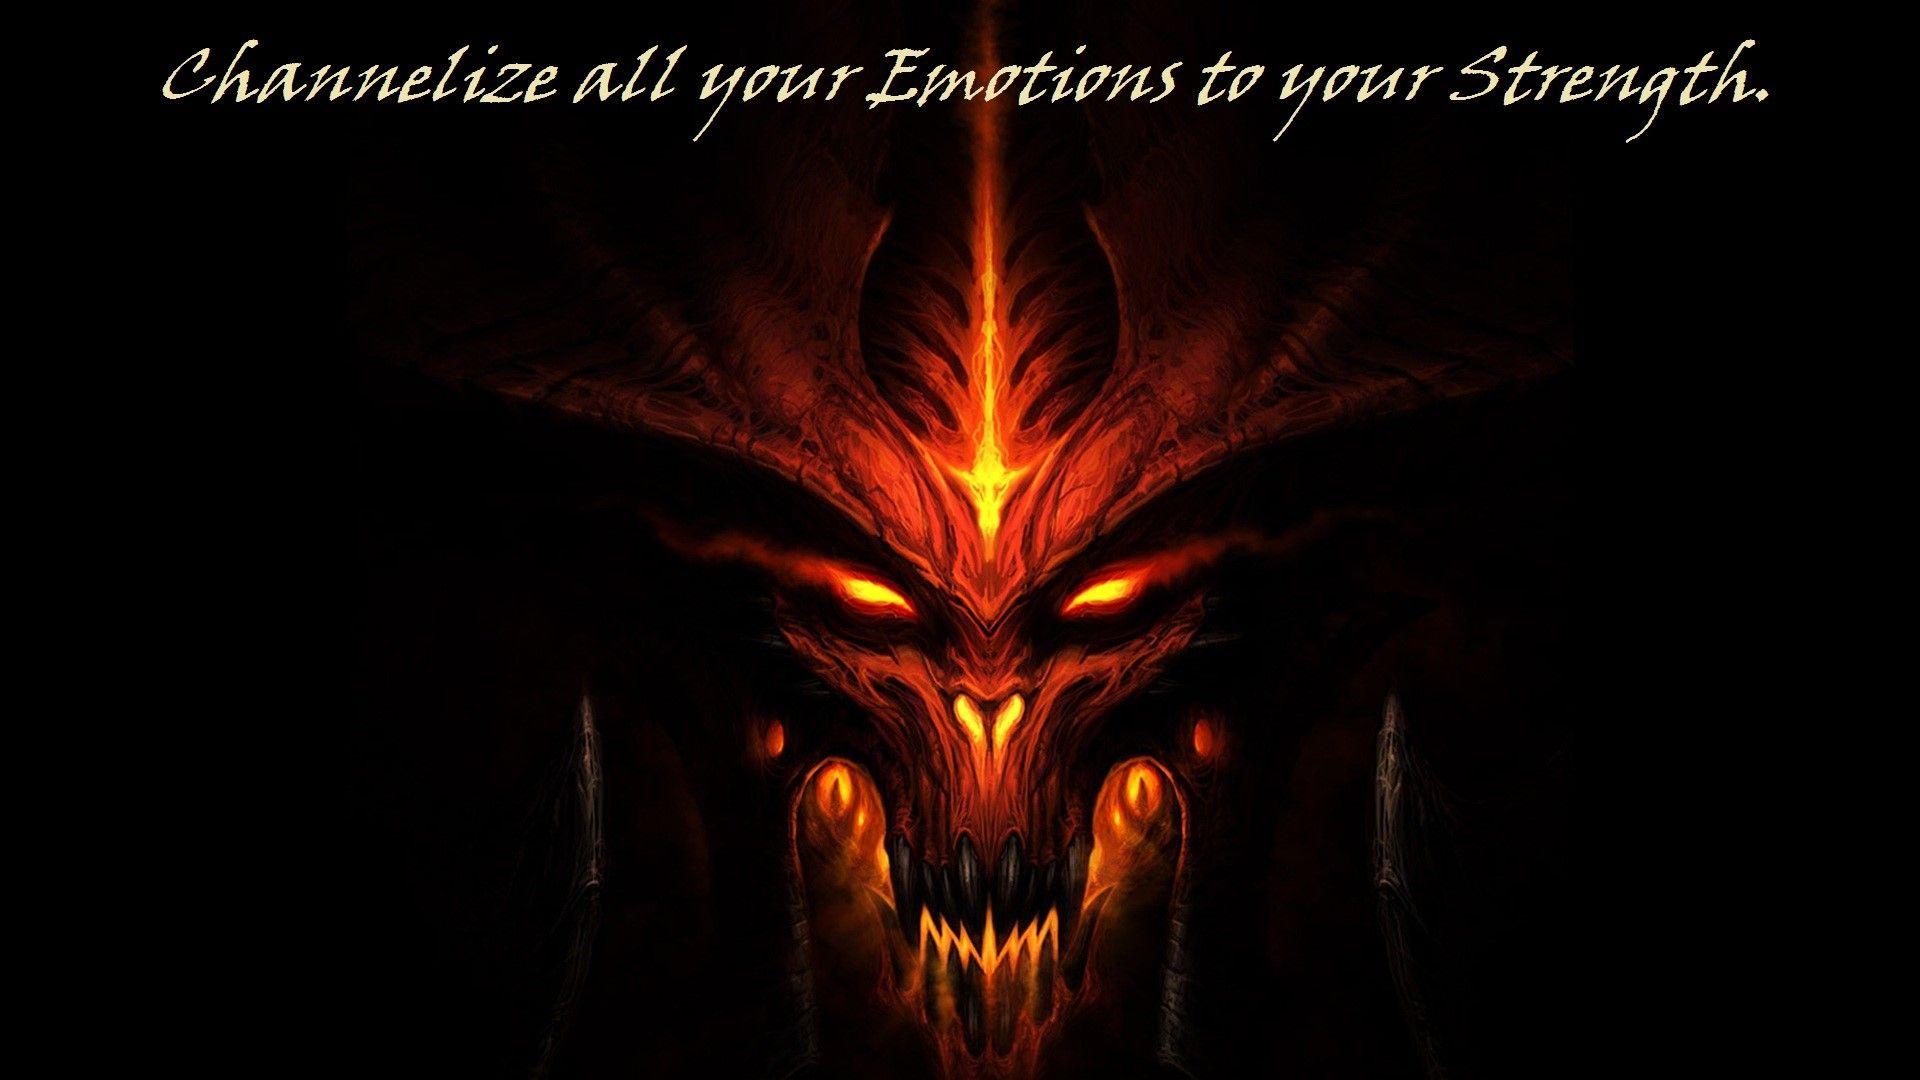 Channelize all your Emotions to your Strength.”- Quotes on Strength by Anger Image. Funny Jokes, Cartoons, Inspirational Quotes